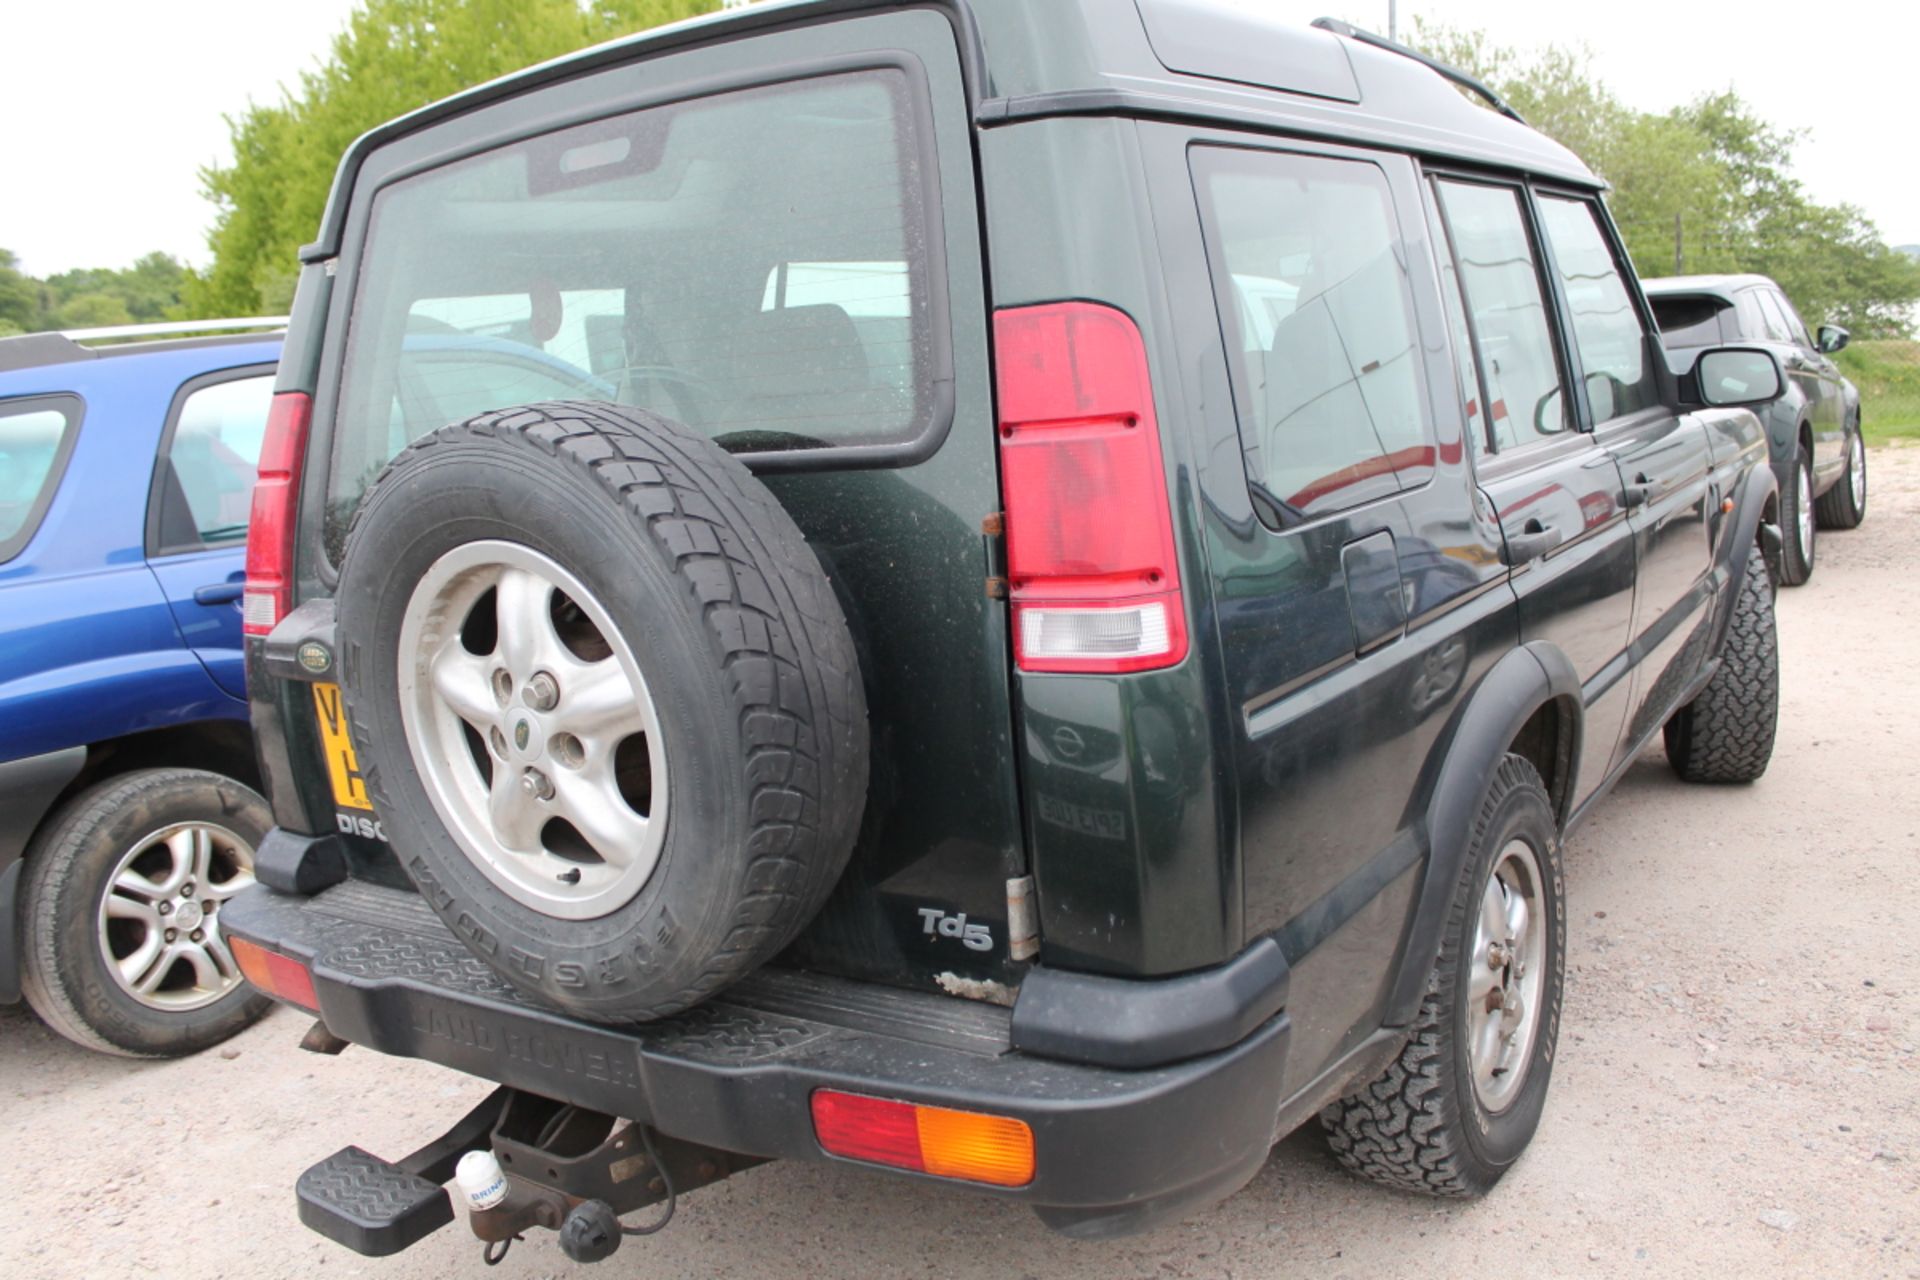 Land Rover Discovery Td5 Gs - 2487cc Estate - Image 3 of 3